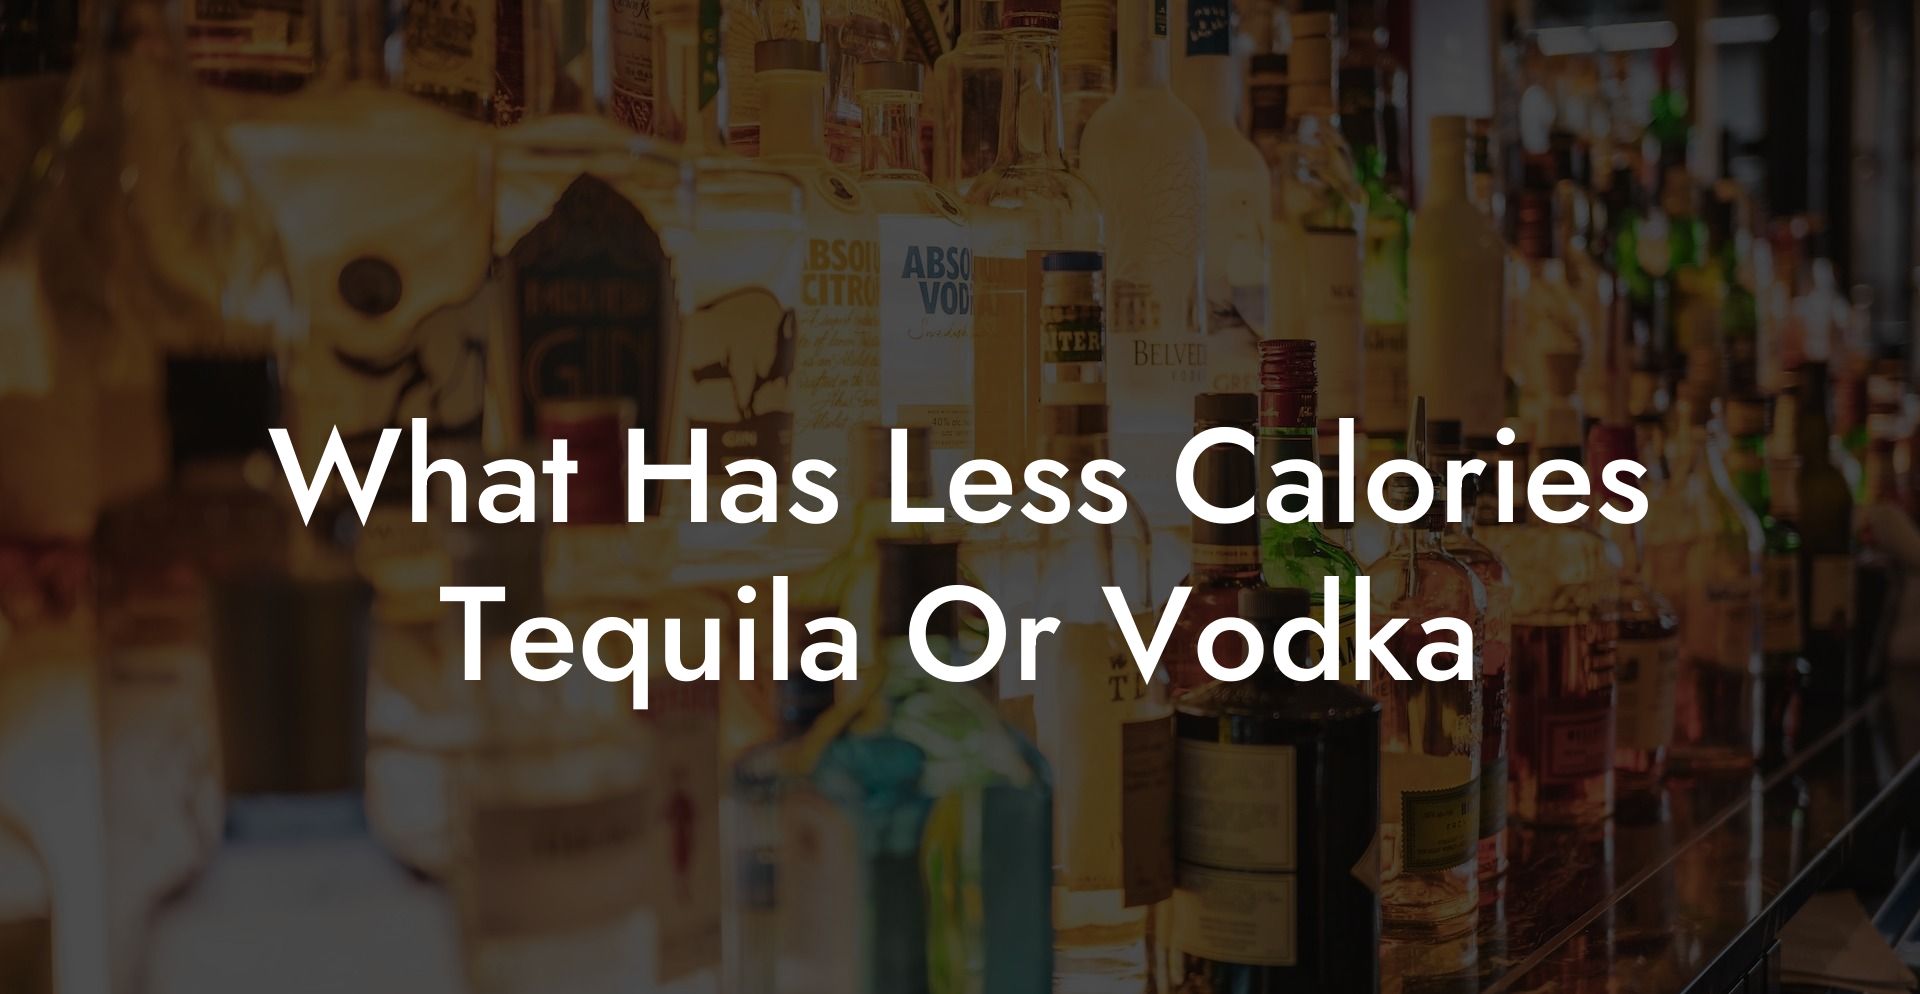 What Has Less Calories Tequila Or Vodka